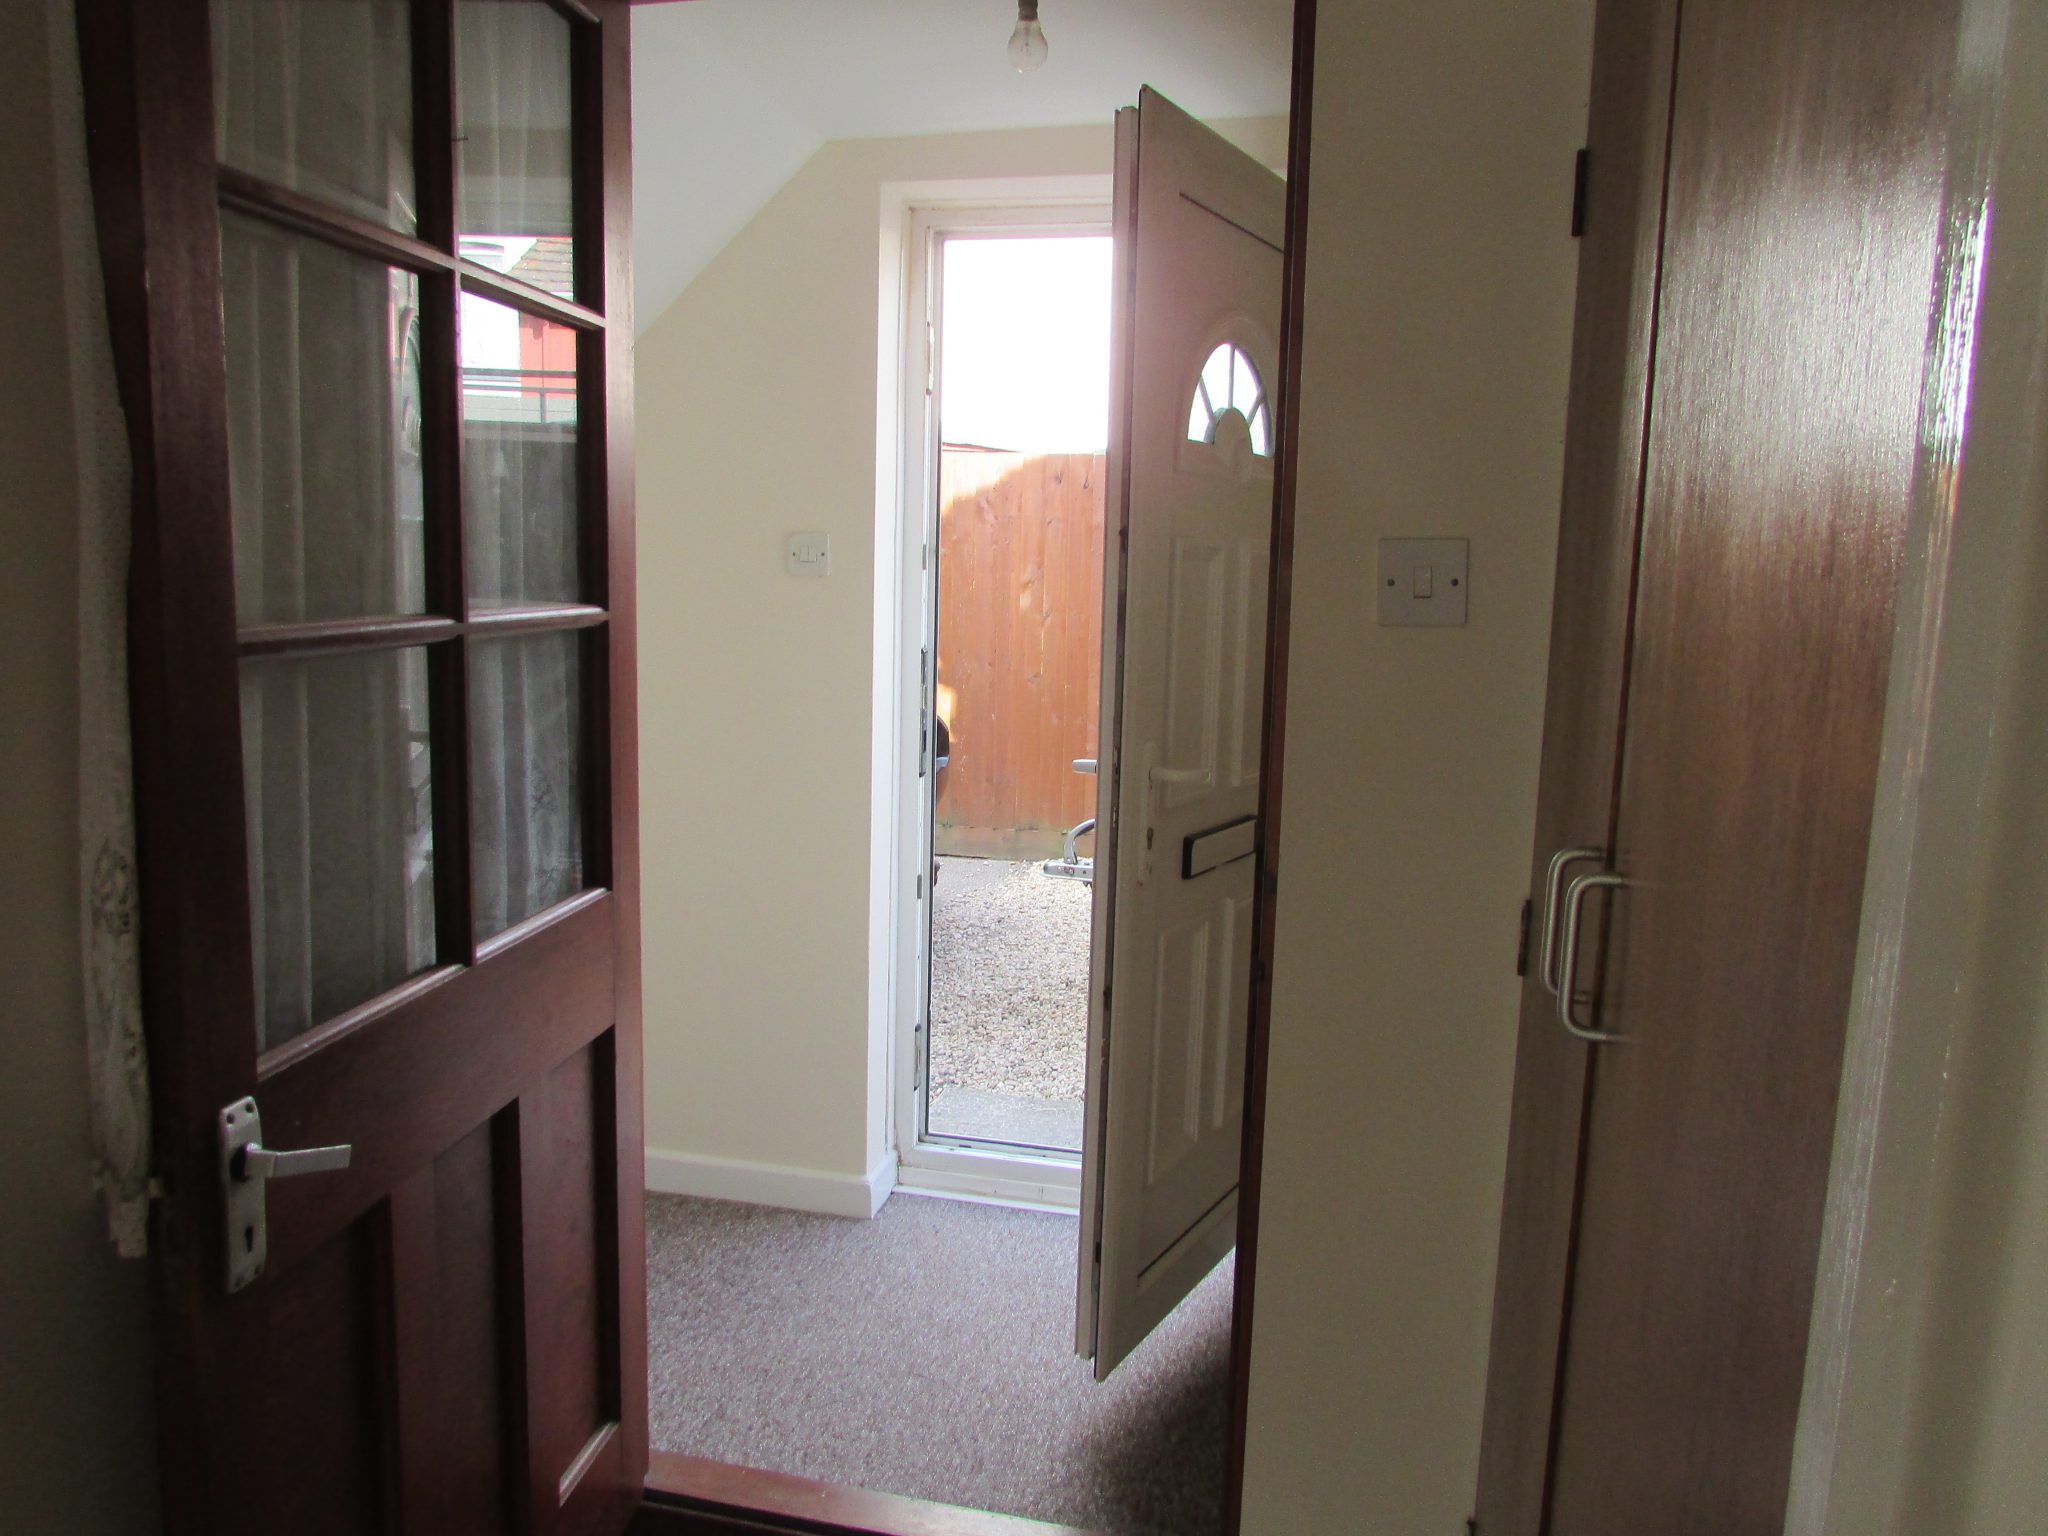 Property to rent, property to let, Warminster, Woodcock Road, John Loftus Property Centre